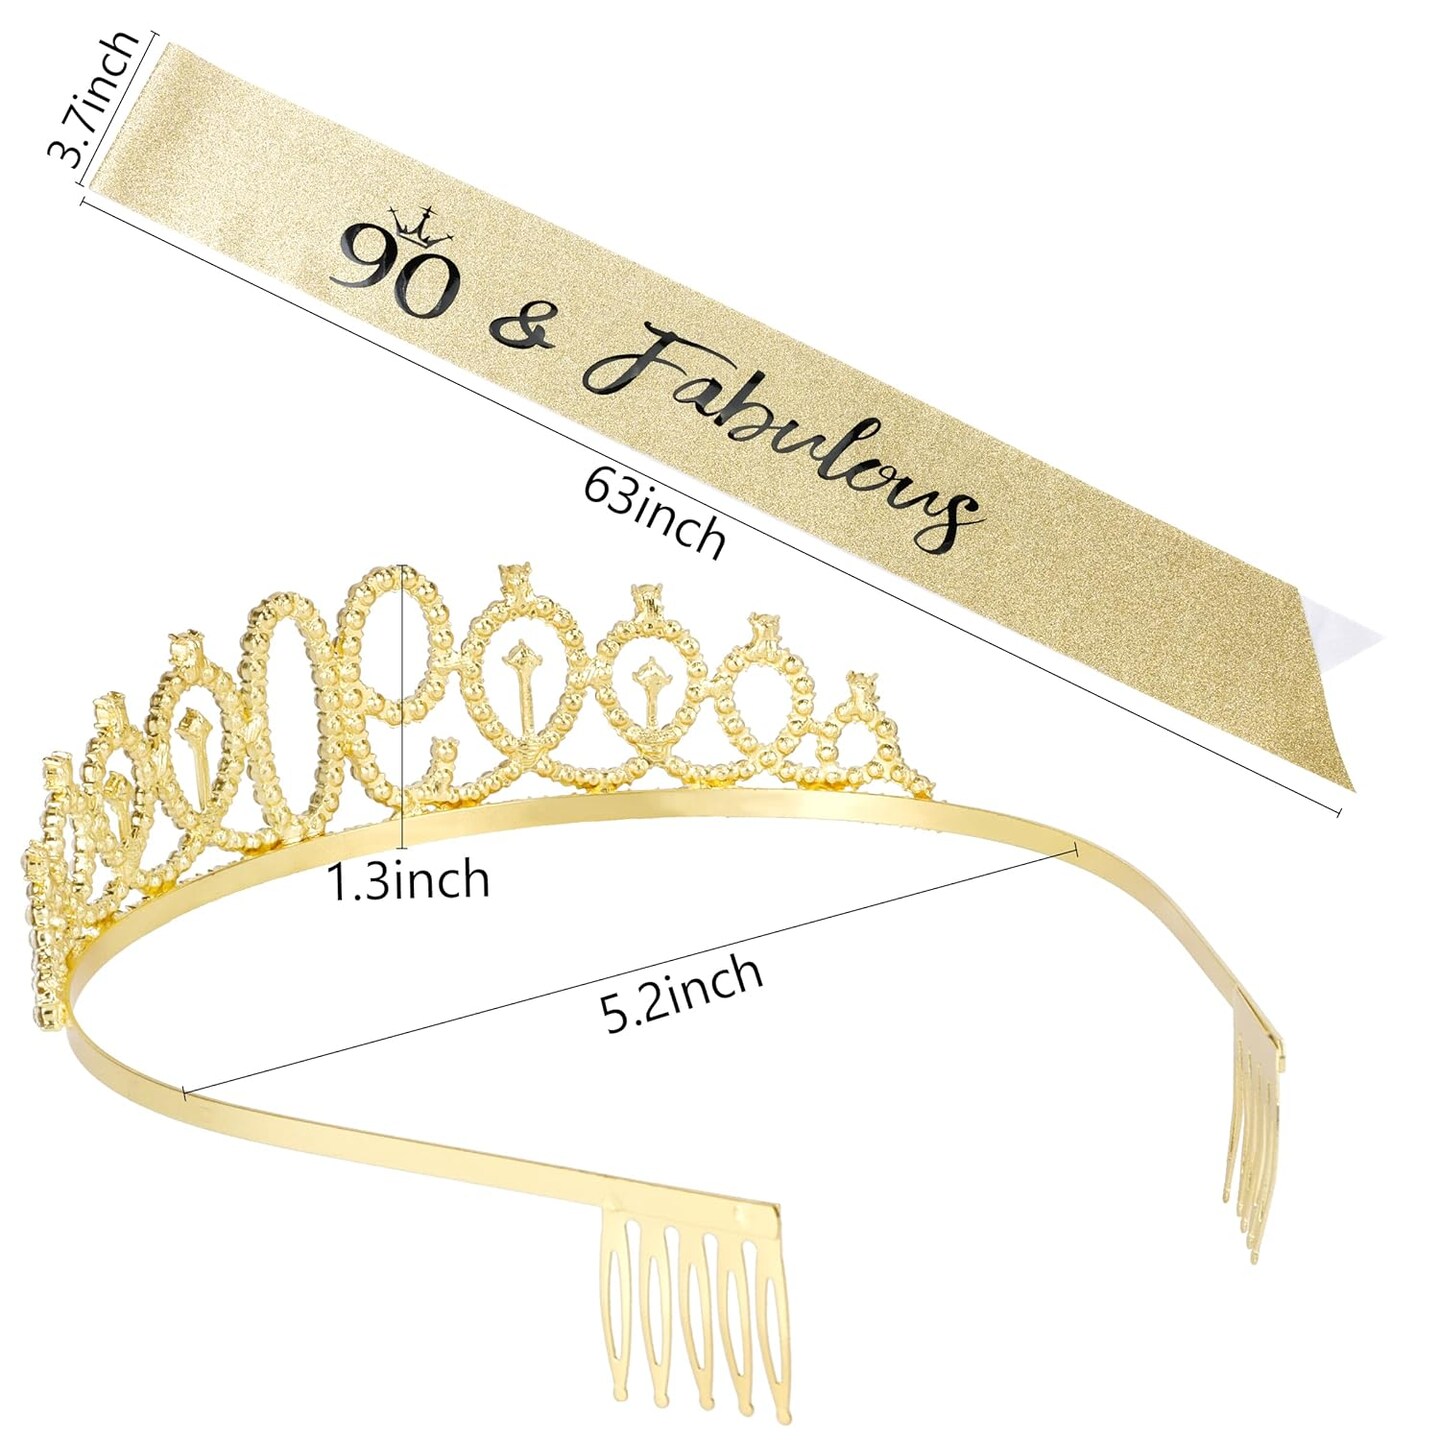 90th Birthday Sash and Tiara, Gold Tiara, 90th Birthday Gifts for Women, 90th Birthday Decorations for Women, Happy 90th Birthday Decorations